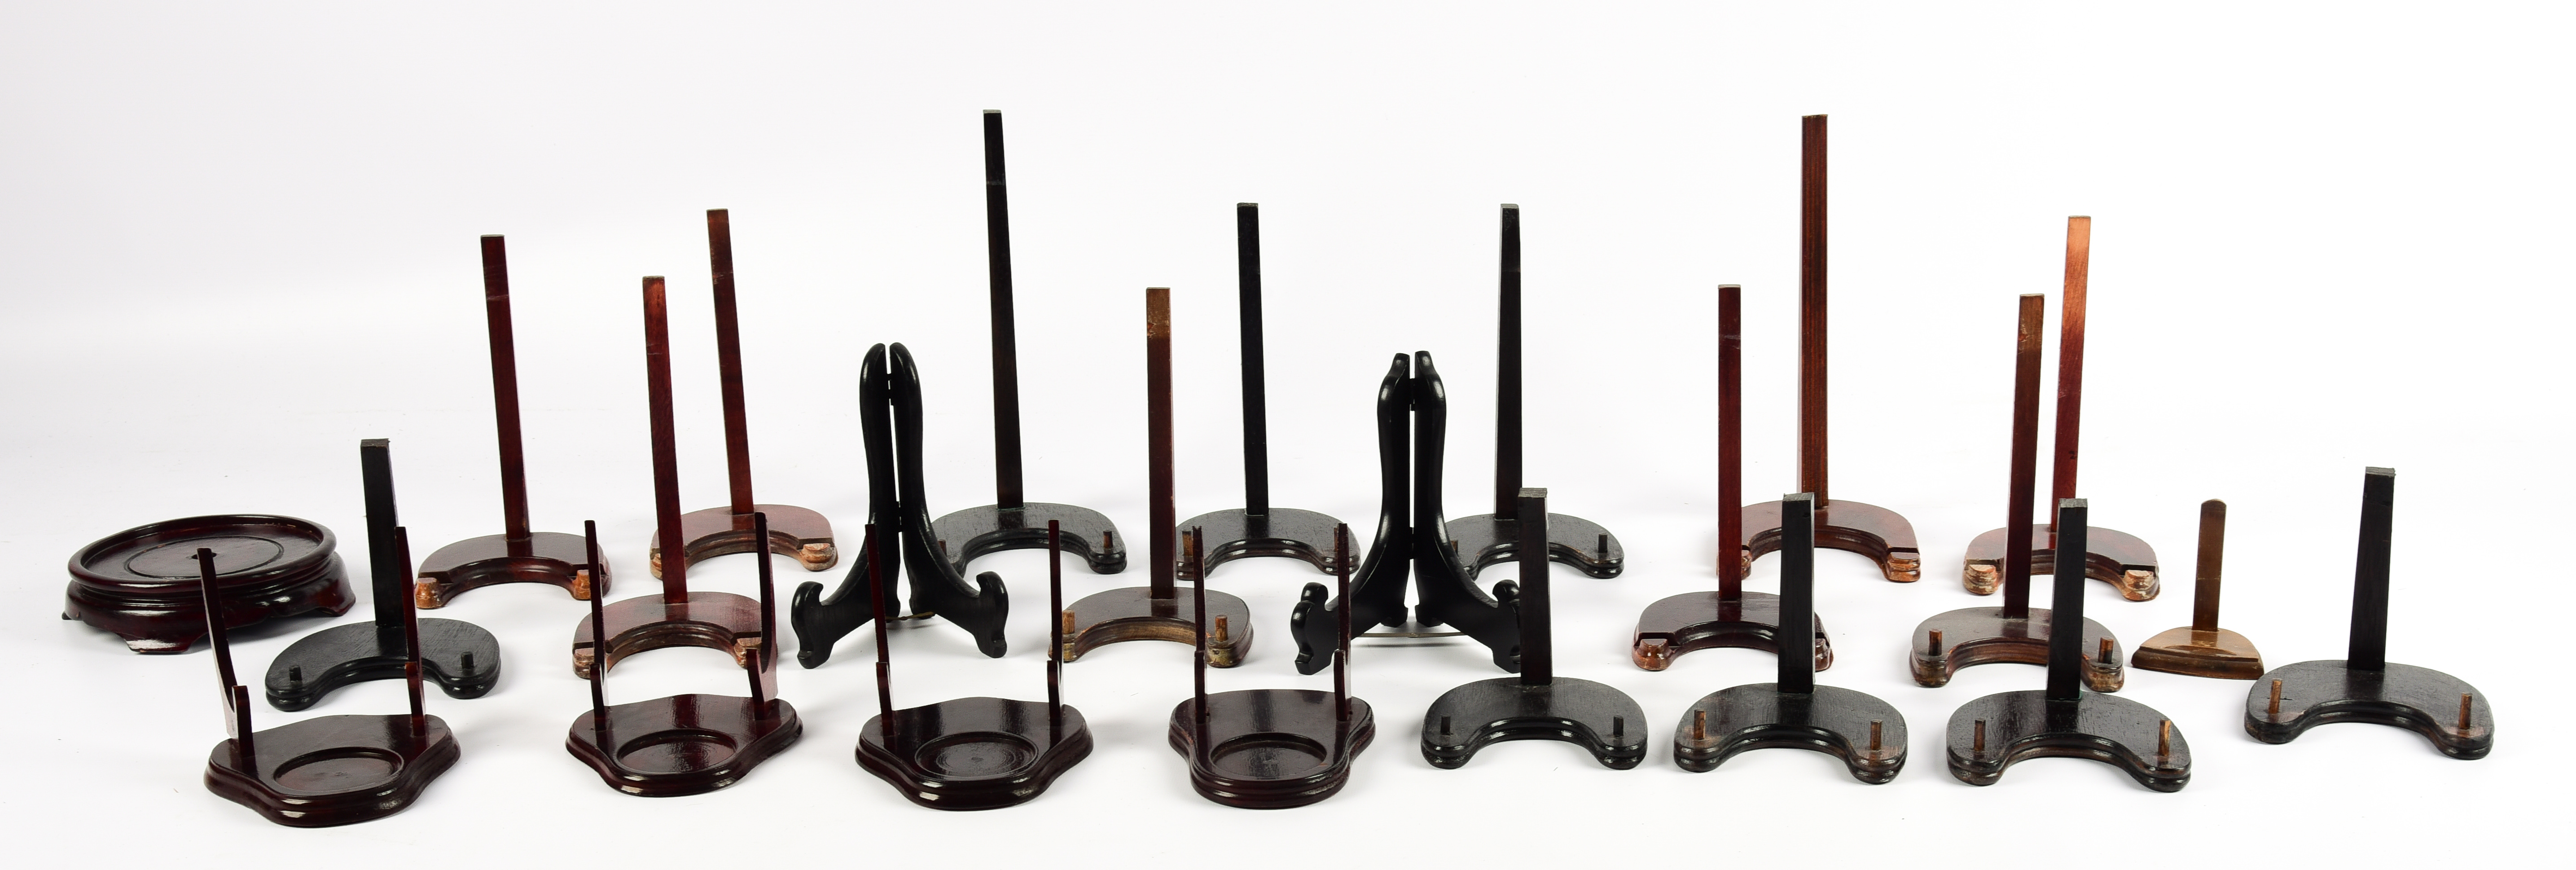 (24) Wooden display stands, c/o